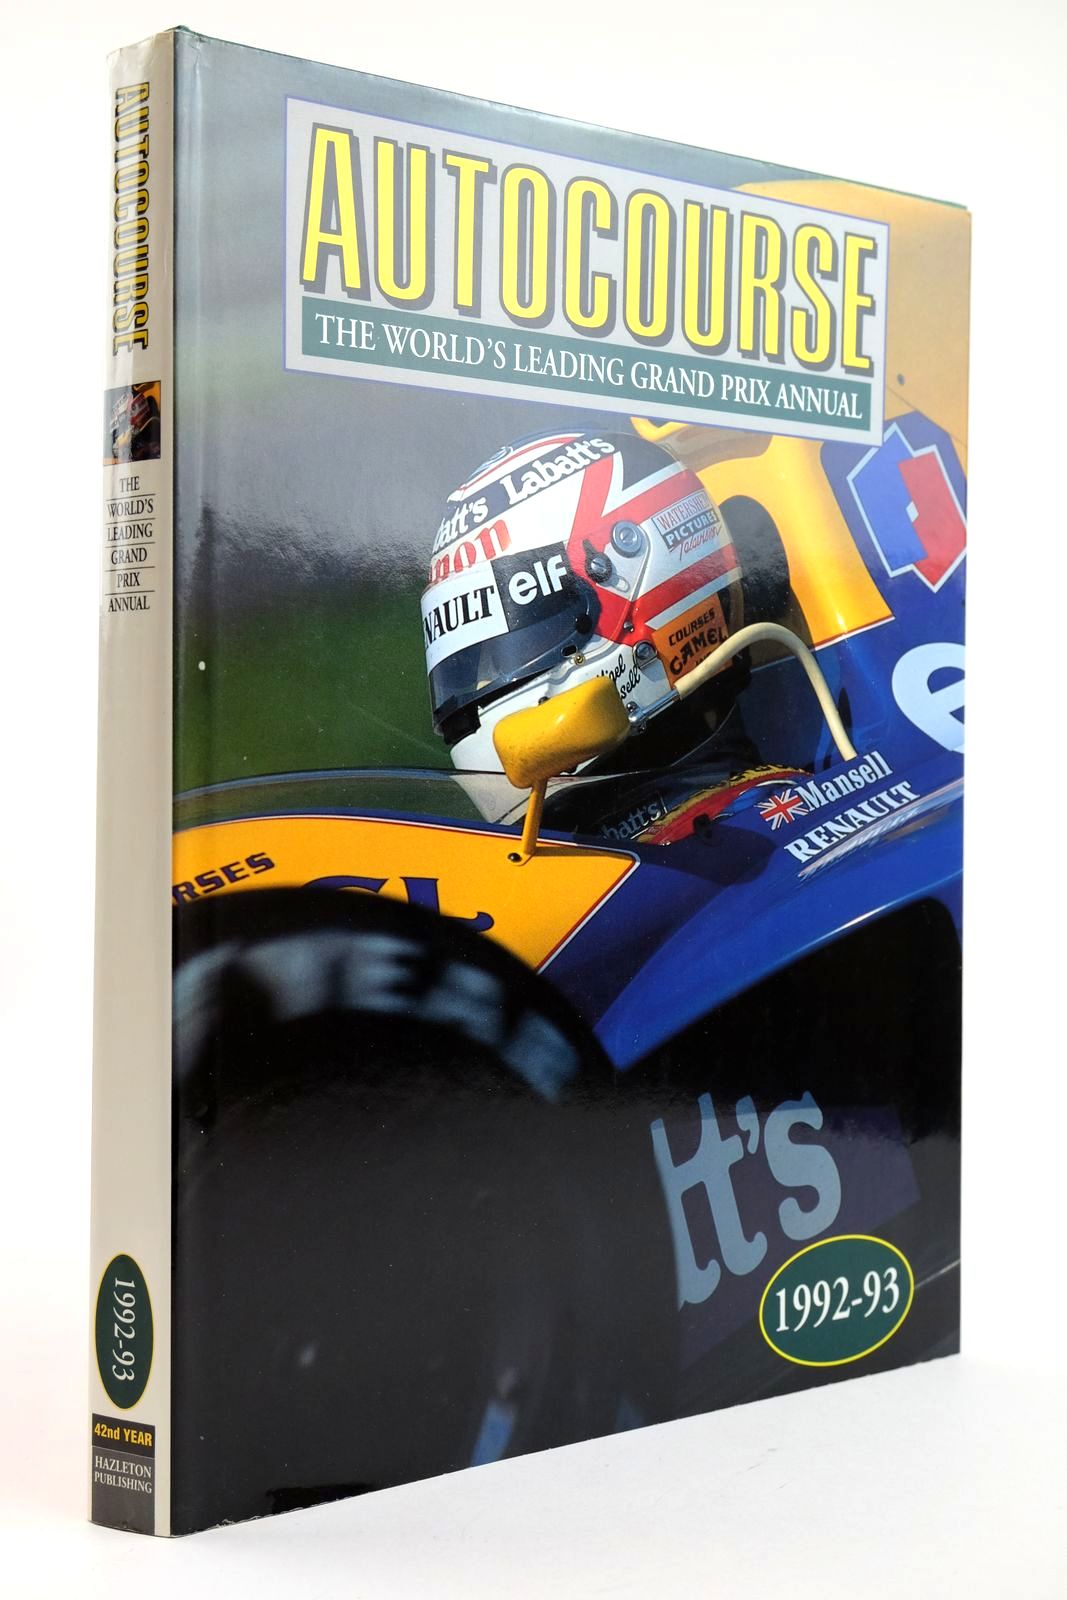 Photo of AUTOCOURSE 1992-93 published by Hazleton Publishing (STOCK CODE: 2132732)  for sale by Stella & Rose's Books